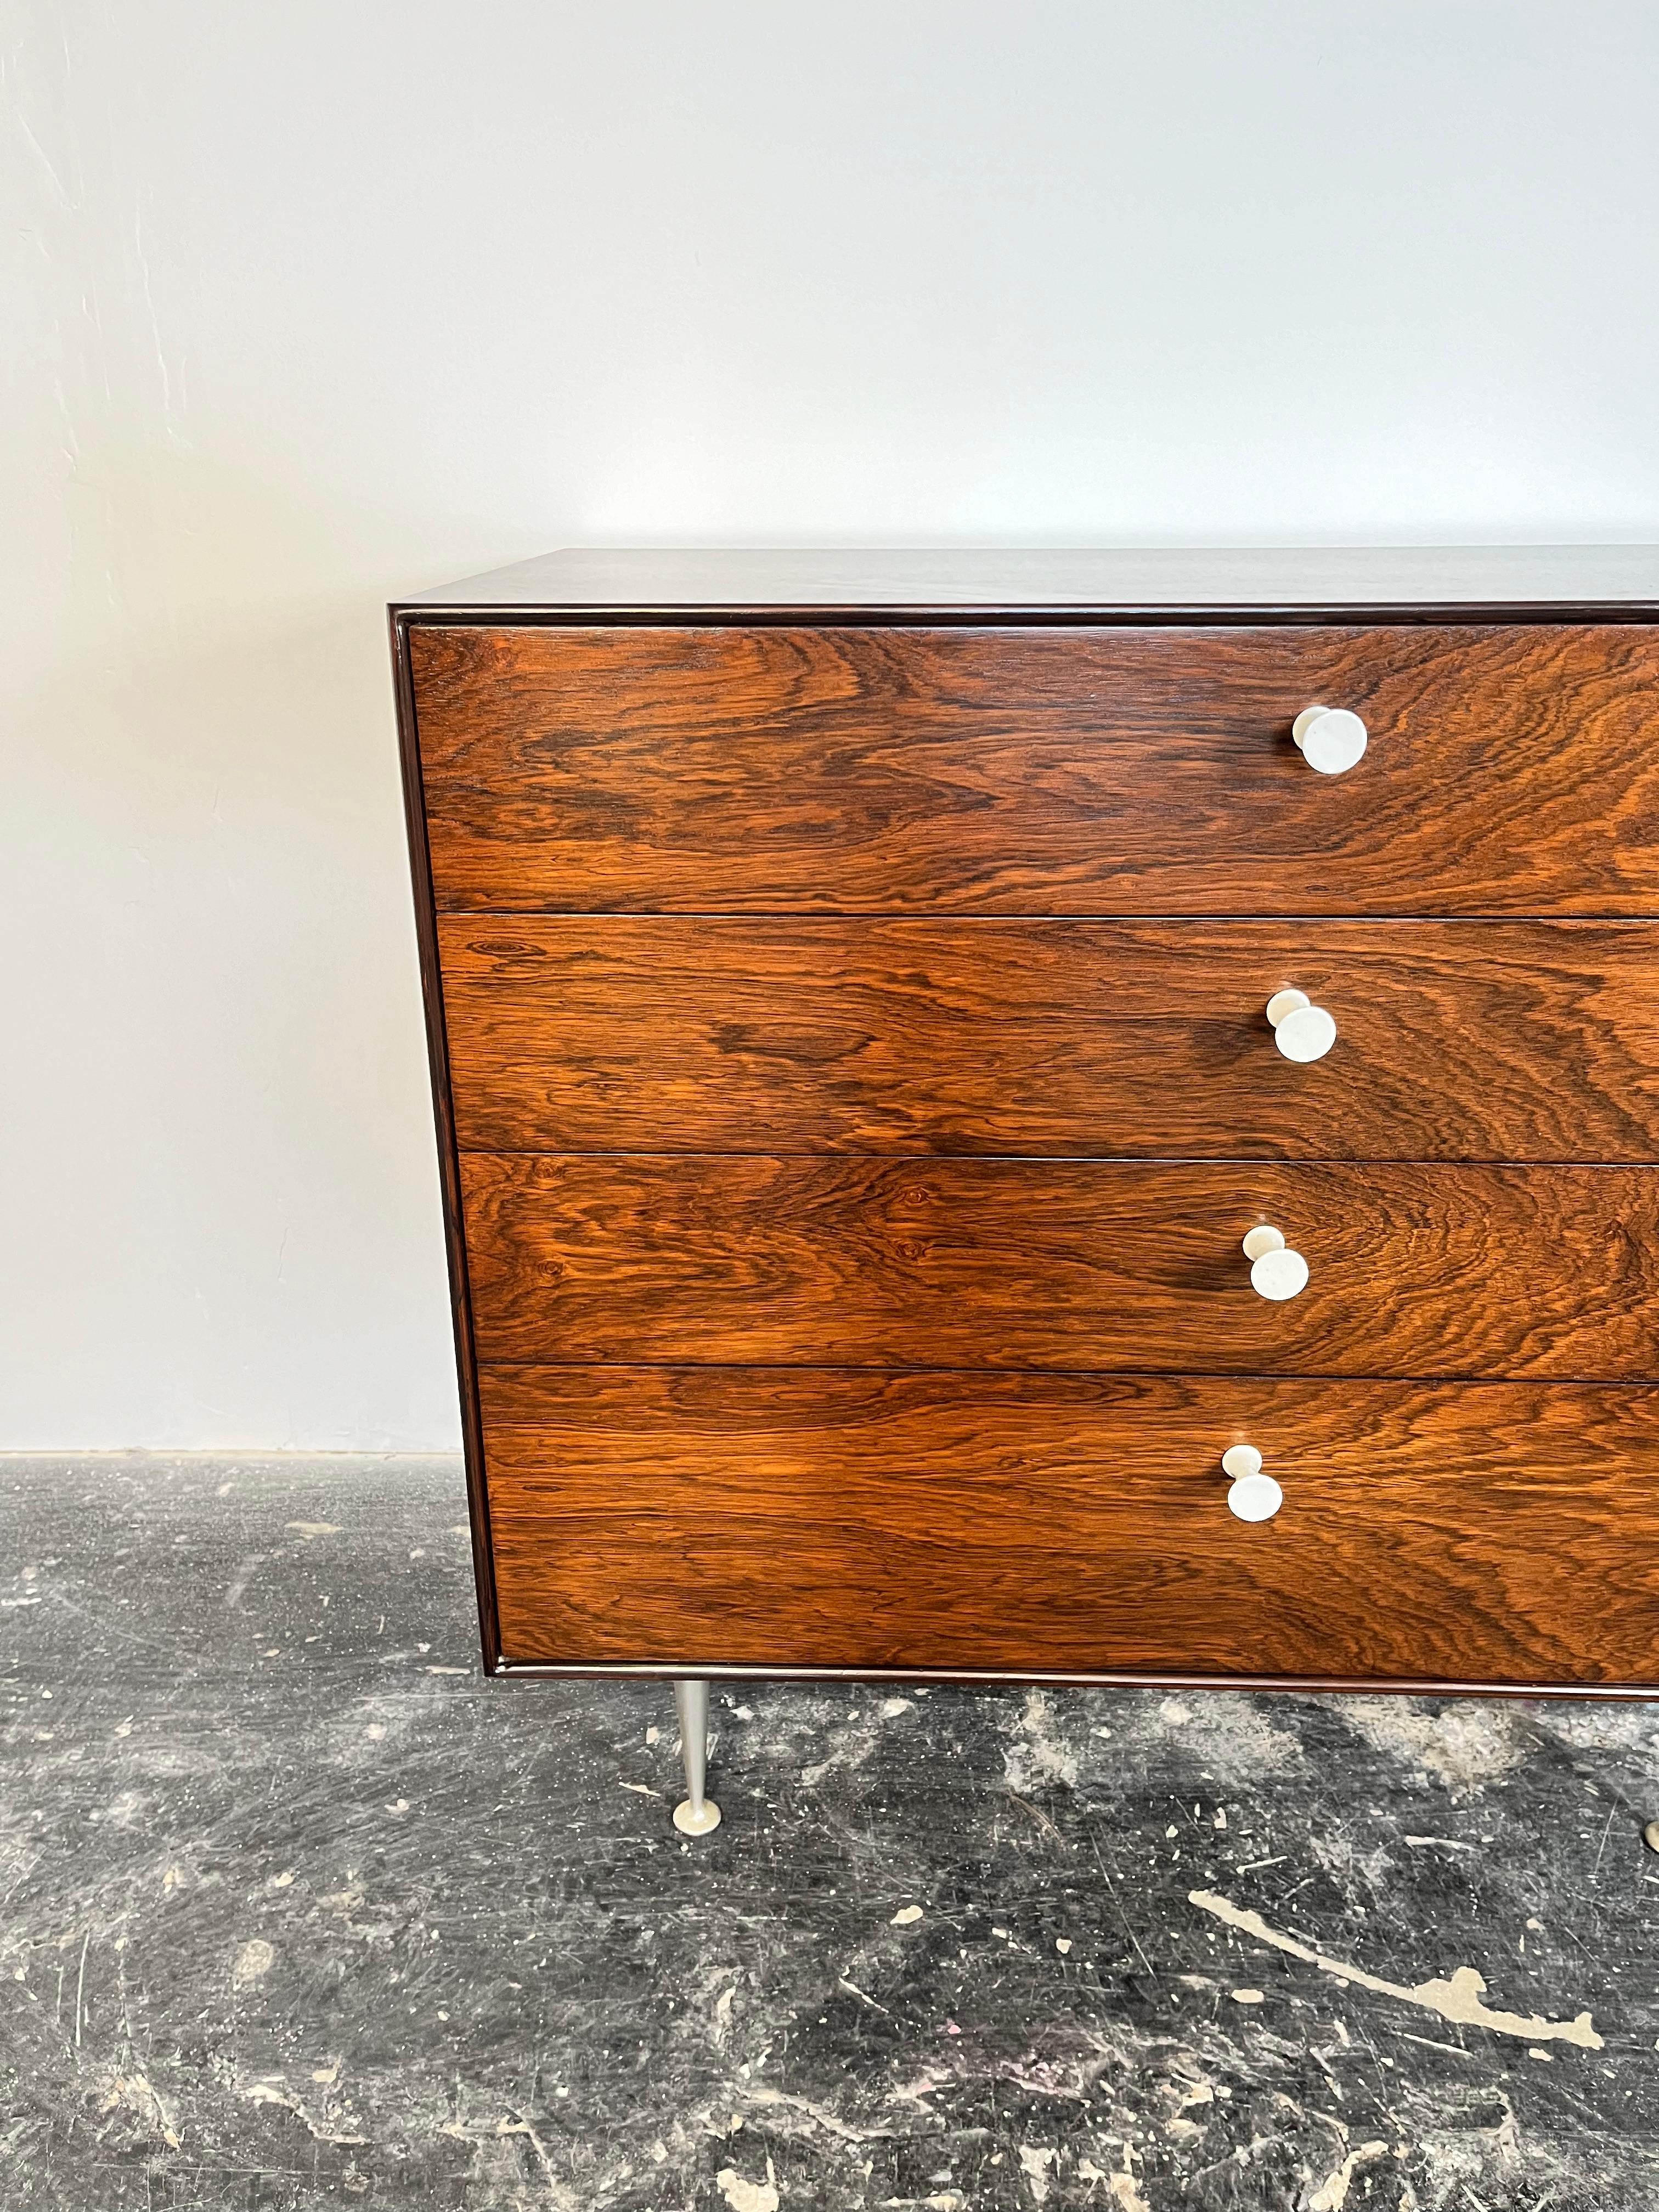 A rosewood thin edge chest designed by George Nelson for Herman Miller with exquisite rosewood grain and early original white porcelain handles. 

The George Nelson Rosewood Thin Edge 4-drawer Dresser, crafted by Herman Miller, epitomizes the